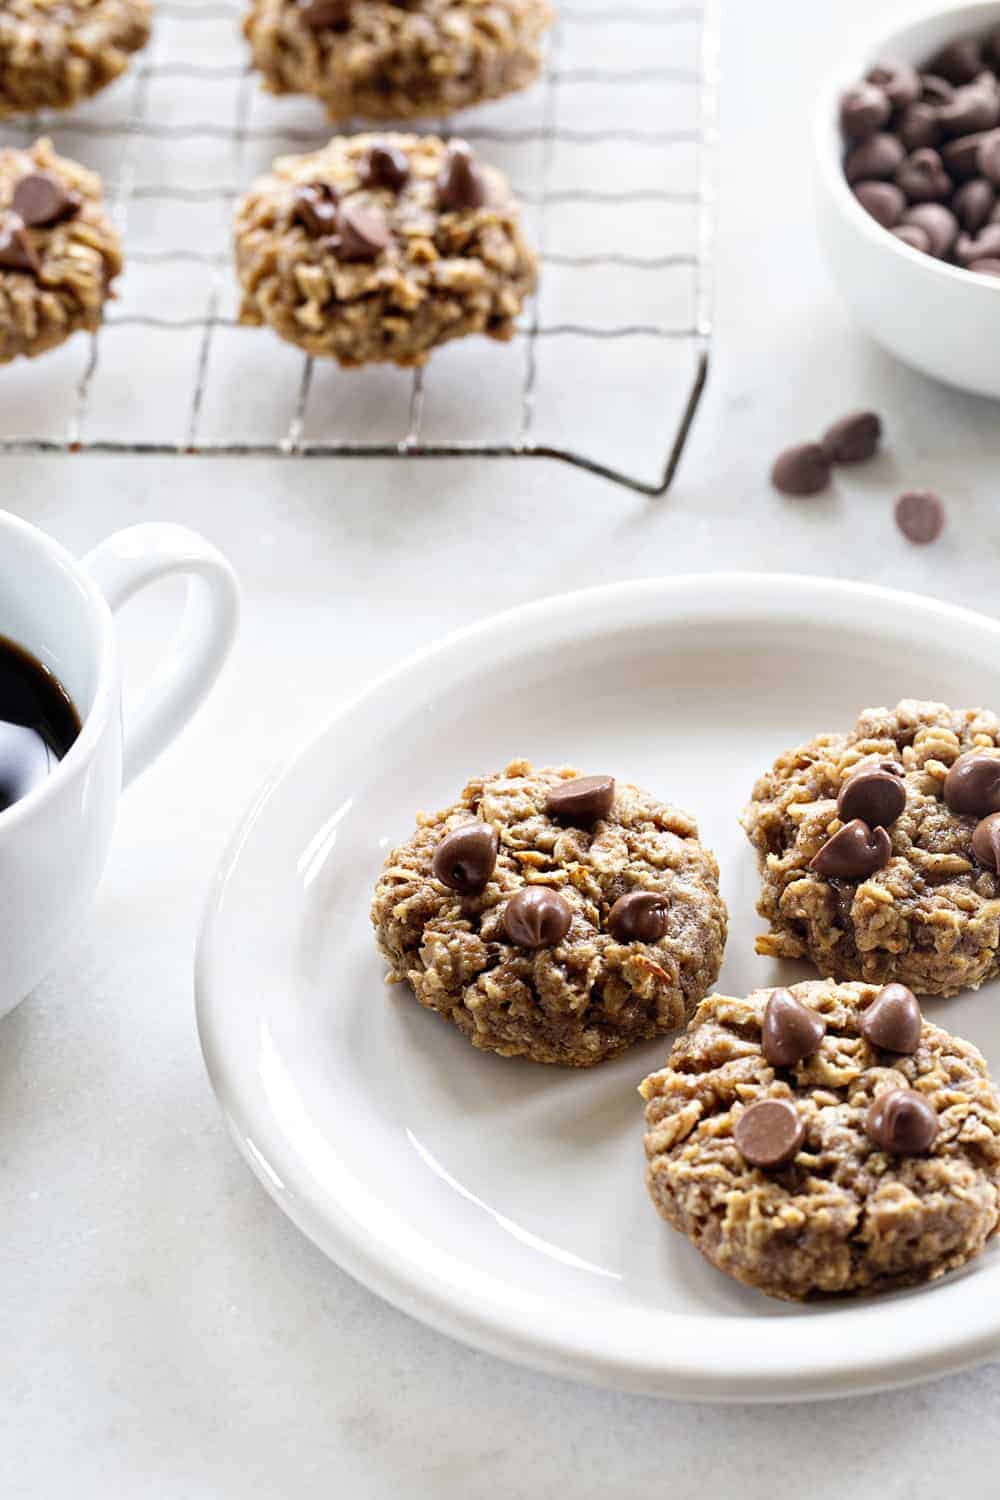 Banana Oatmeal Cookies are soft, chewy and studded with chocolate. Nuts and dried cranberries are also a perfect addition.